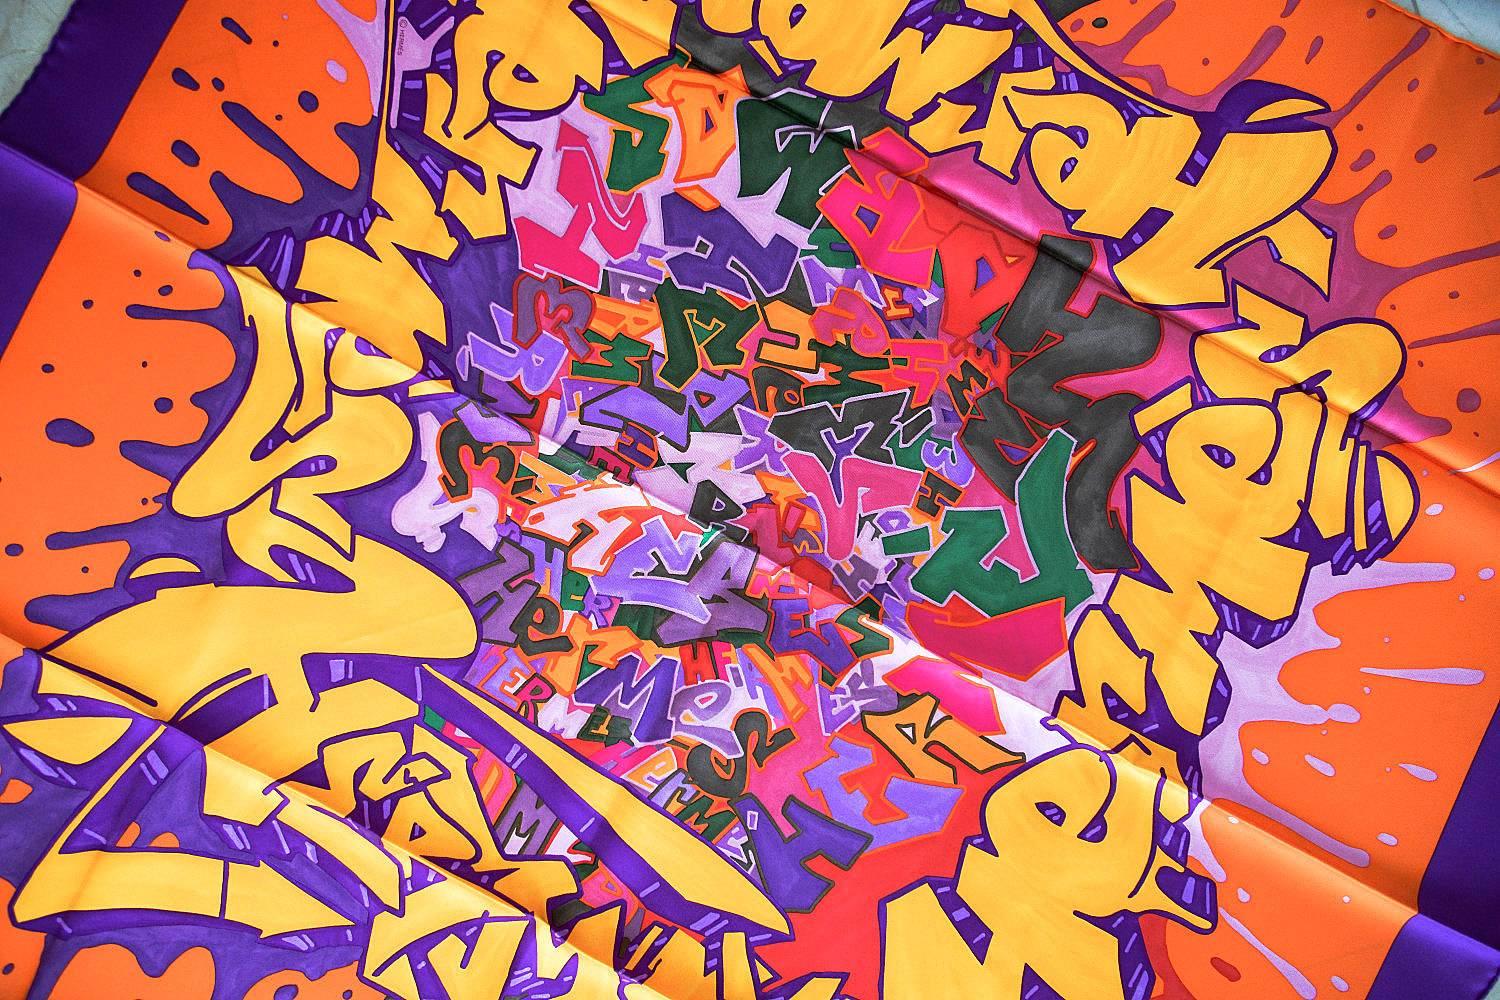 Guaranteed authentic collectible Graff Hermes signed silk scarf in Orange, Jaune d'Or and Purple colour way. 
Stunning Graff Hermes signed by French street artist Cyril Phan aka Kongo is a visual explosion of color with hand rolled edge. Issued